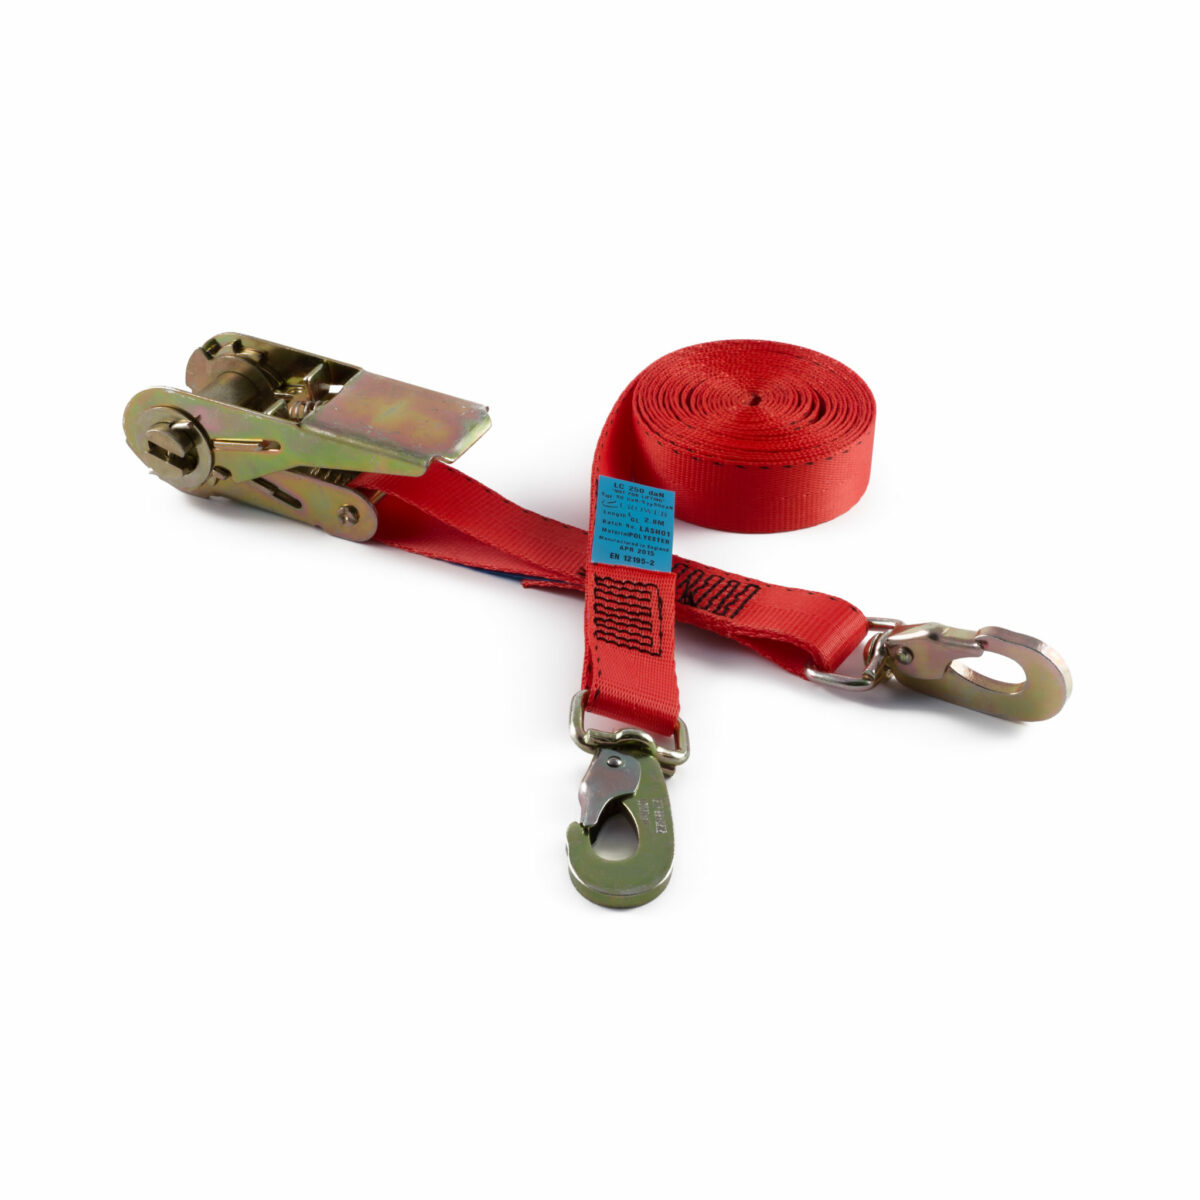 25mm Ratchet Straps with Swivel Snap Hooks rated to 500kg - GTF